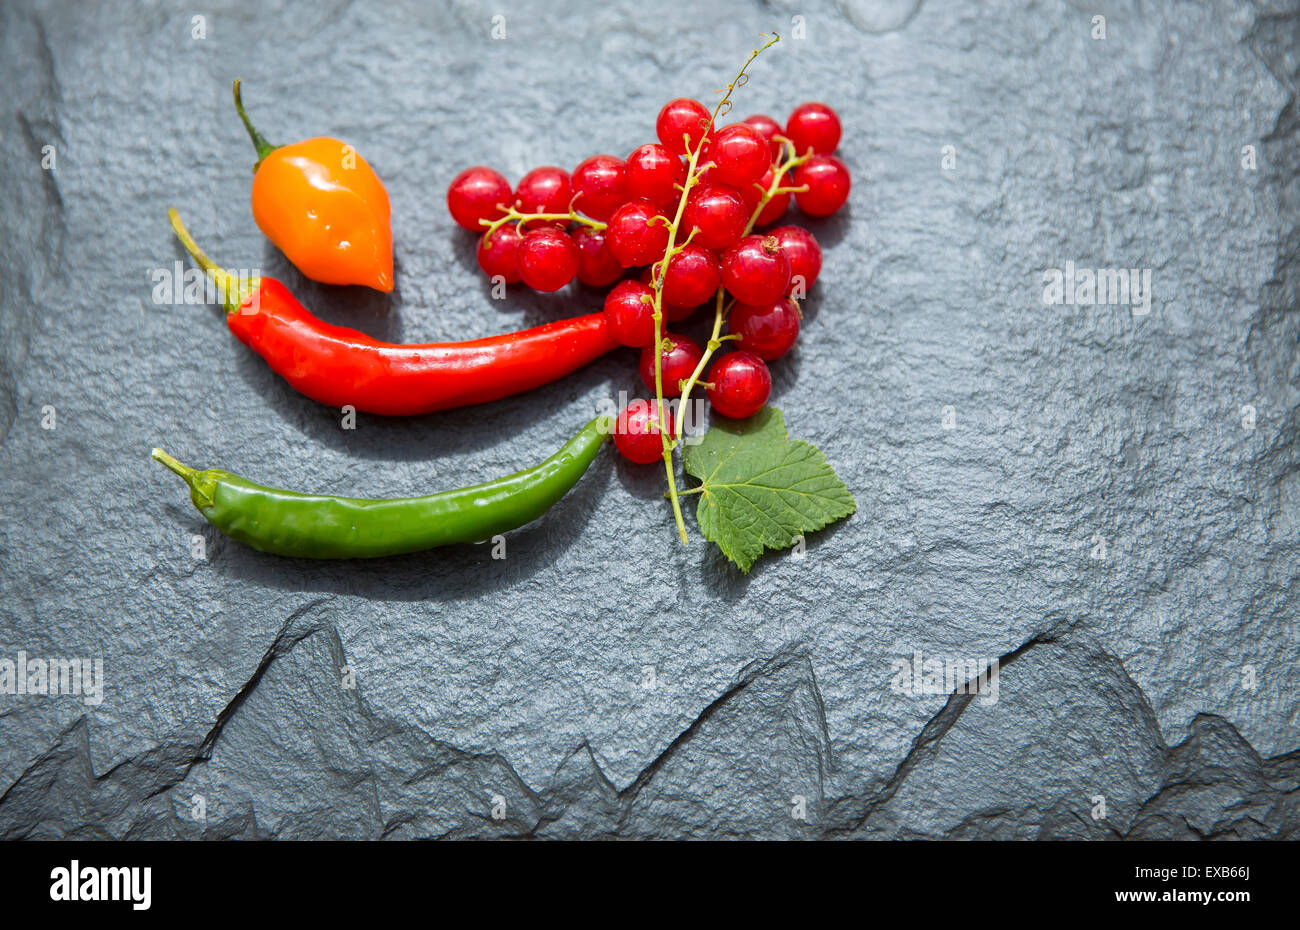 Redcurrants and chillies on slate platter. Stock Photo